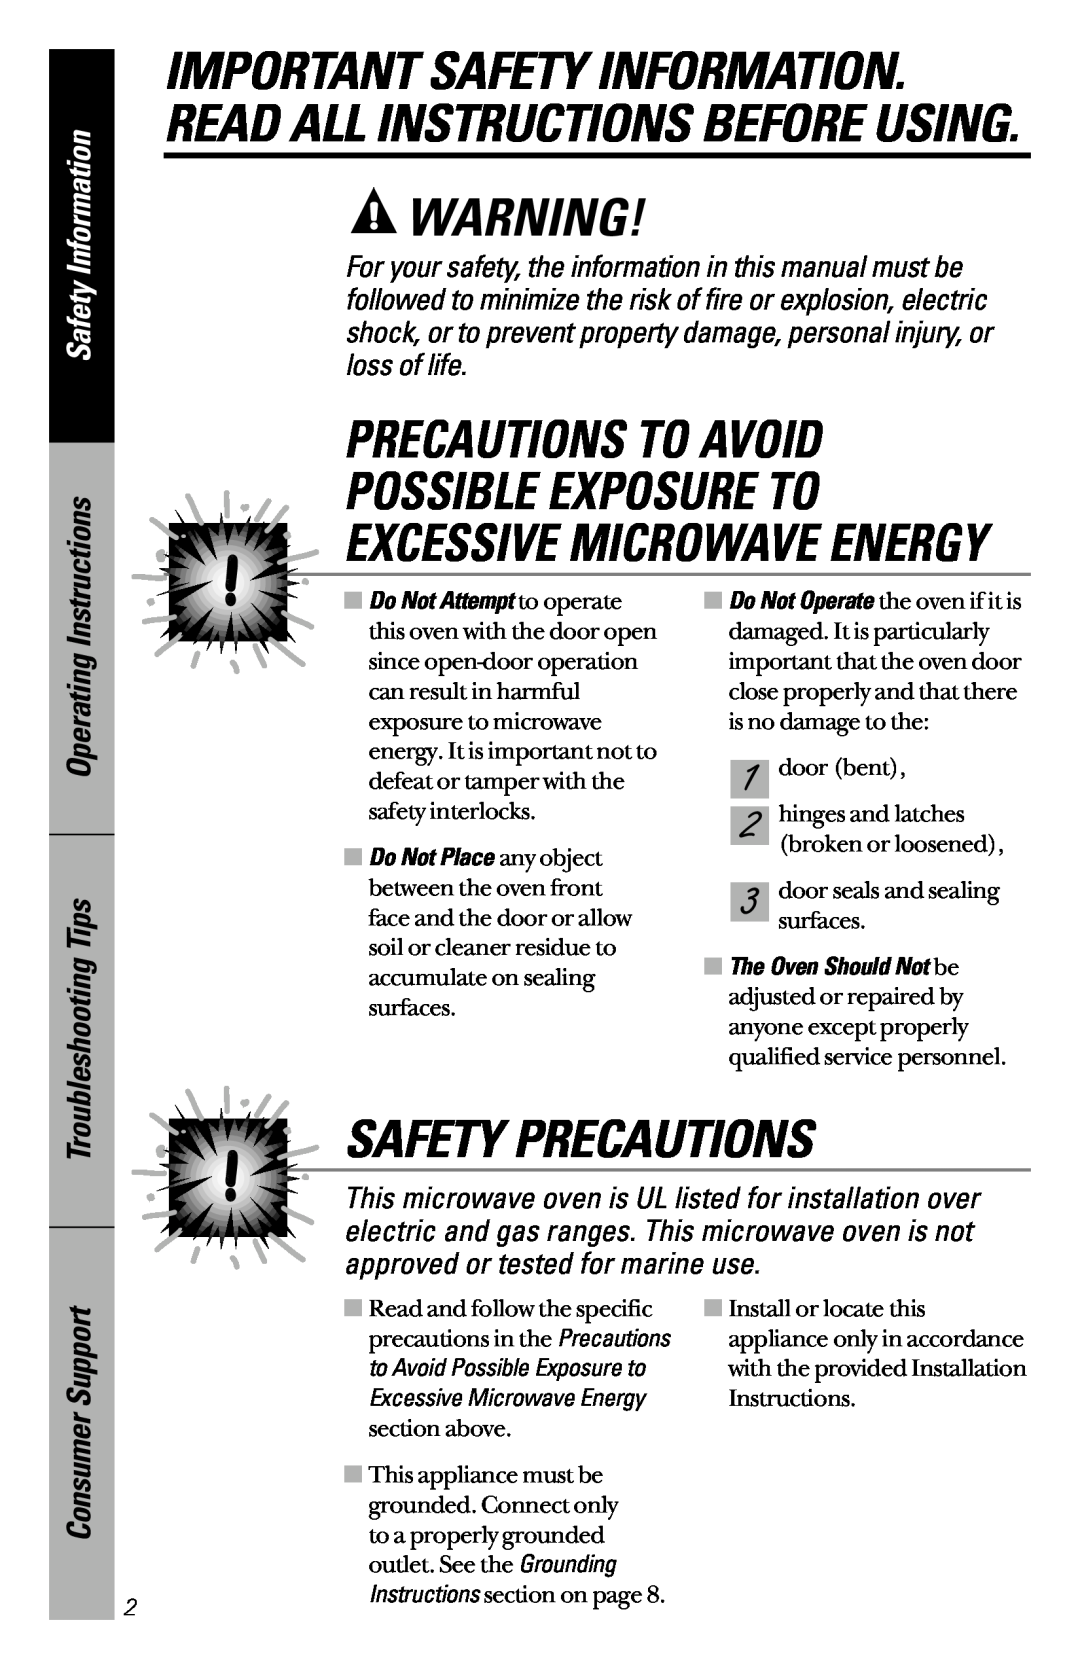 GE JVM1533 Precautions To Avoid Possible Exposure To, Safety Precautions, Excessive Microwave Energy, Safety Information 